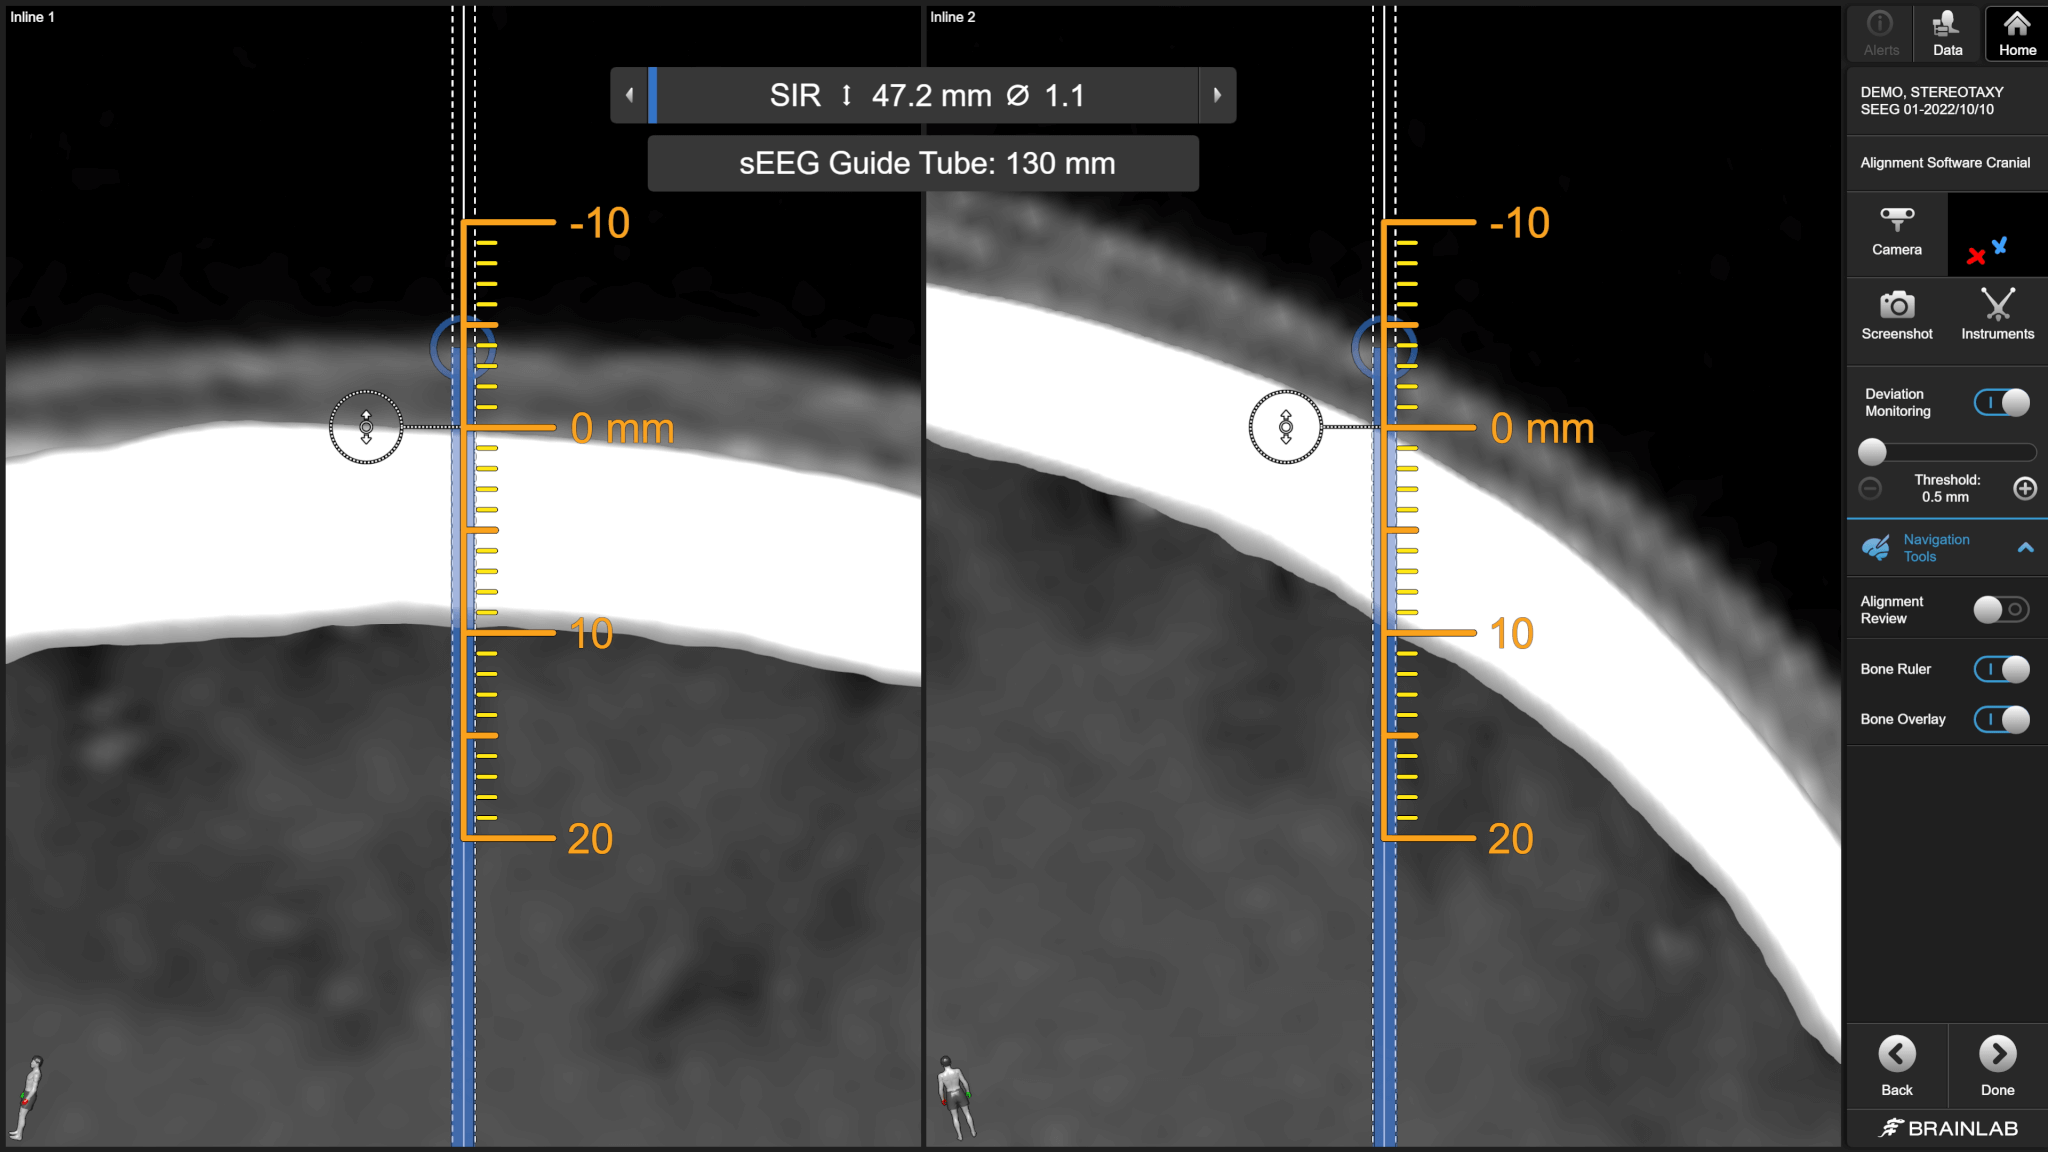 Cirq Alignment Software Cranial: Manual pre-alignment with anchor bolt height consideration